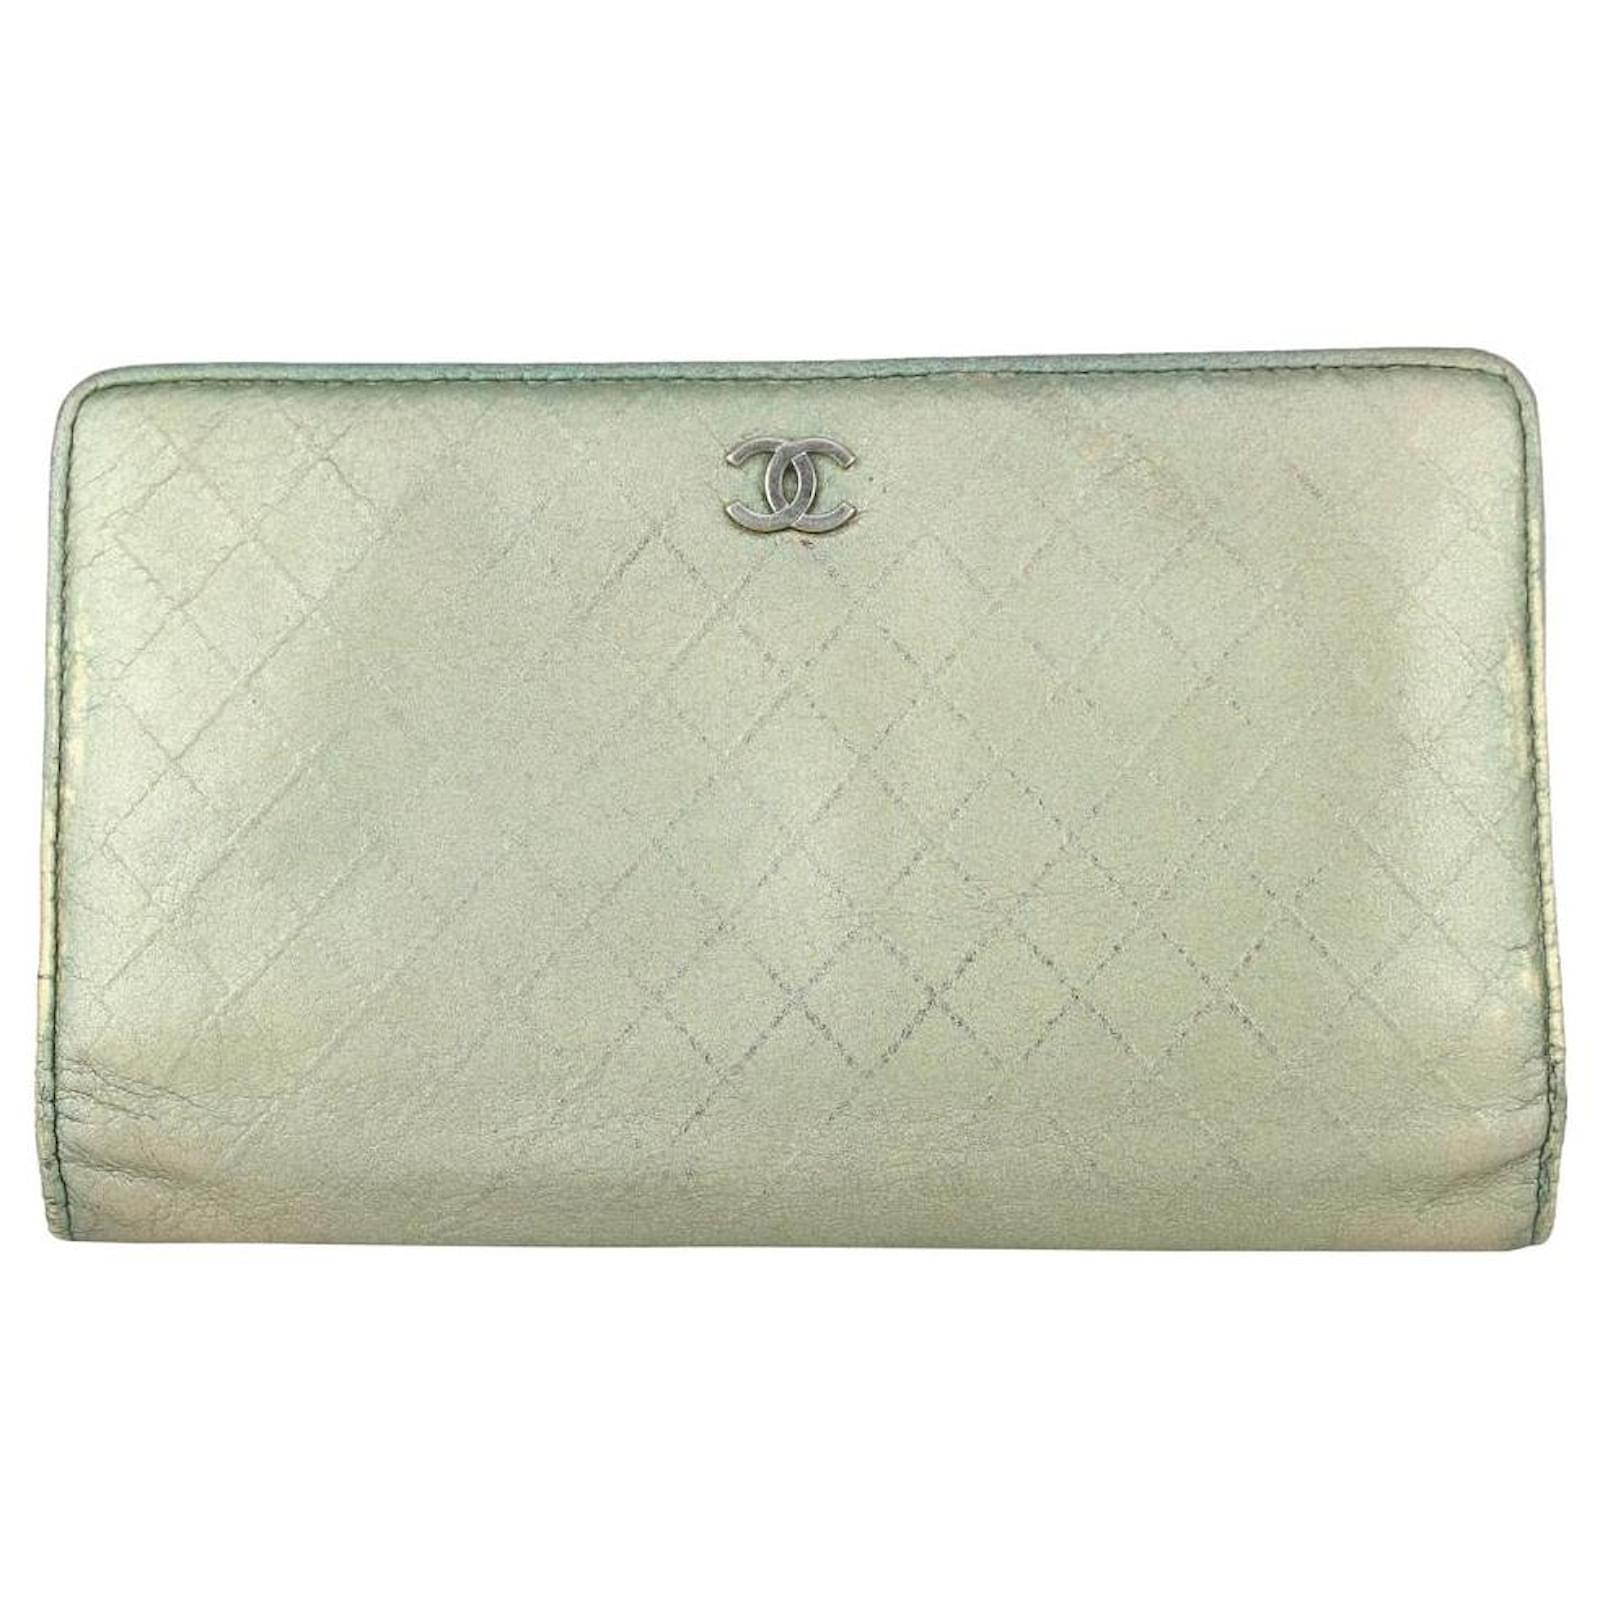 Chanel Quilted Metallic Green Leather Long Bifold Flap Wallet ref